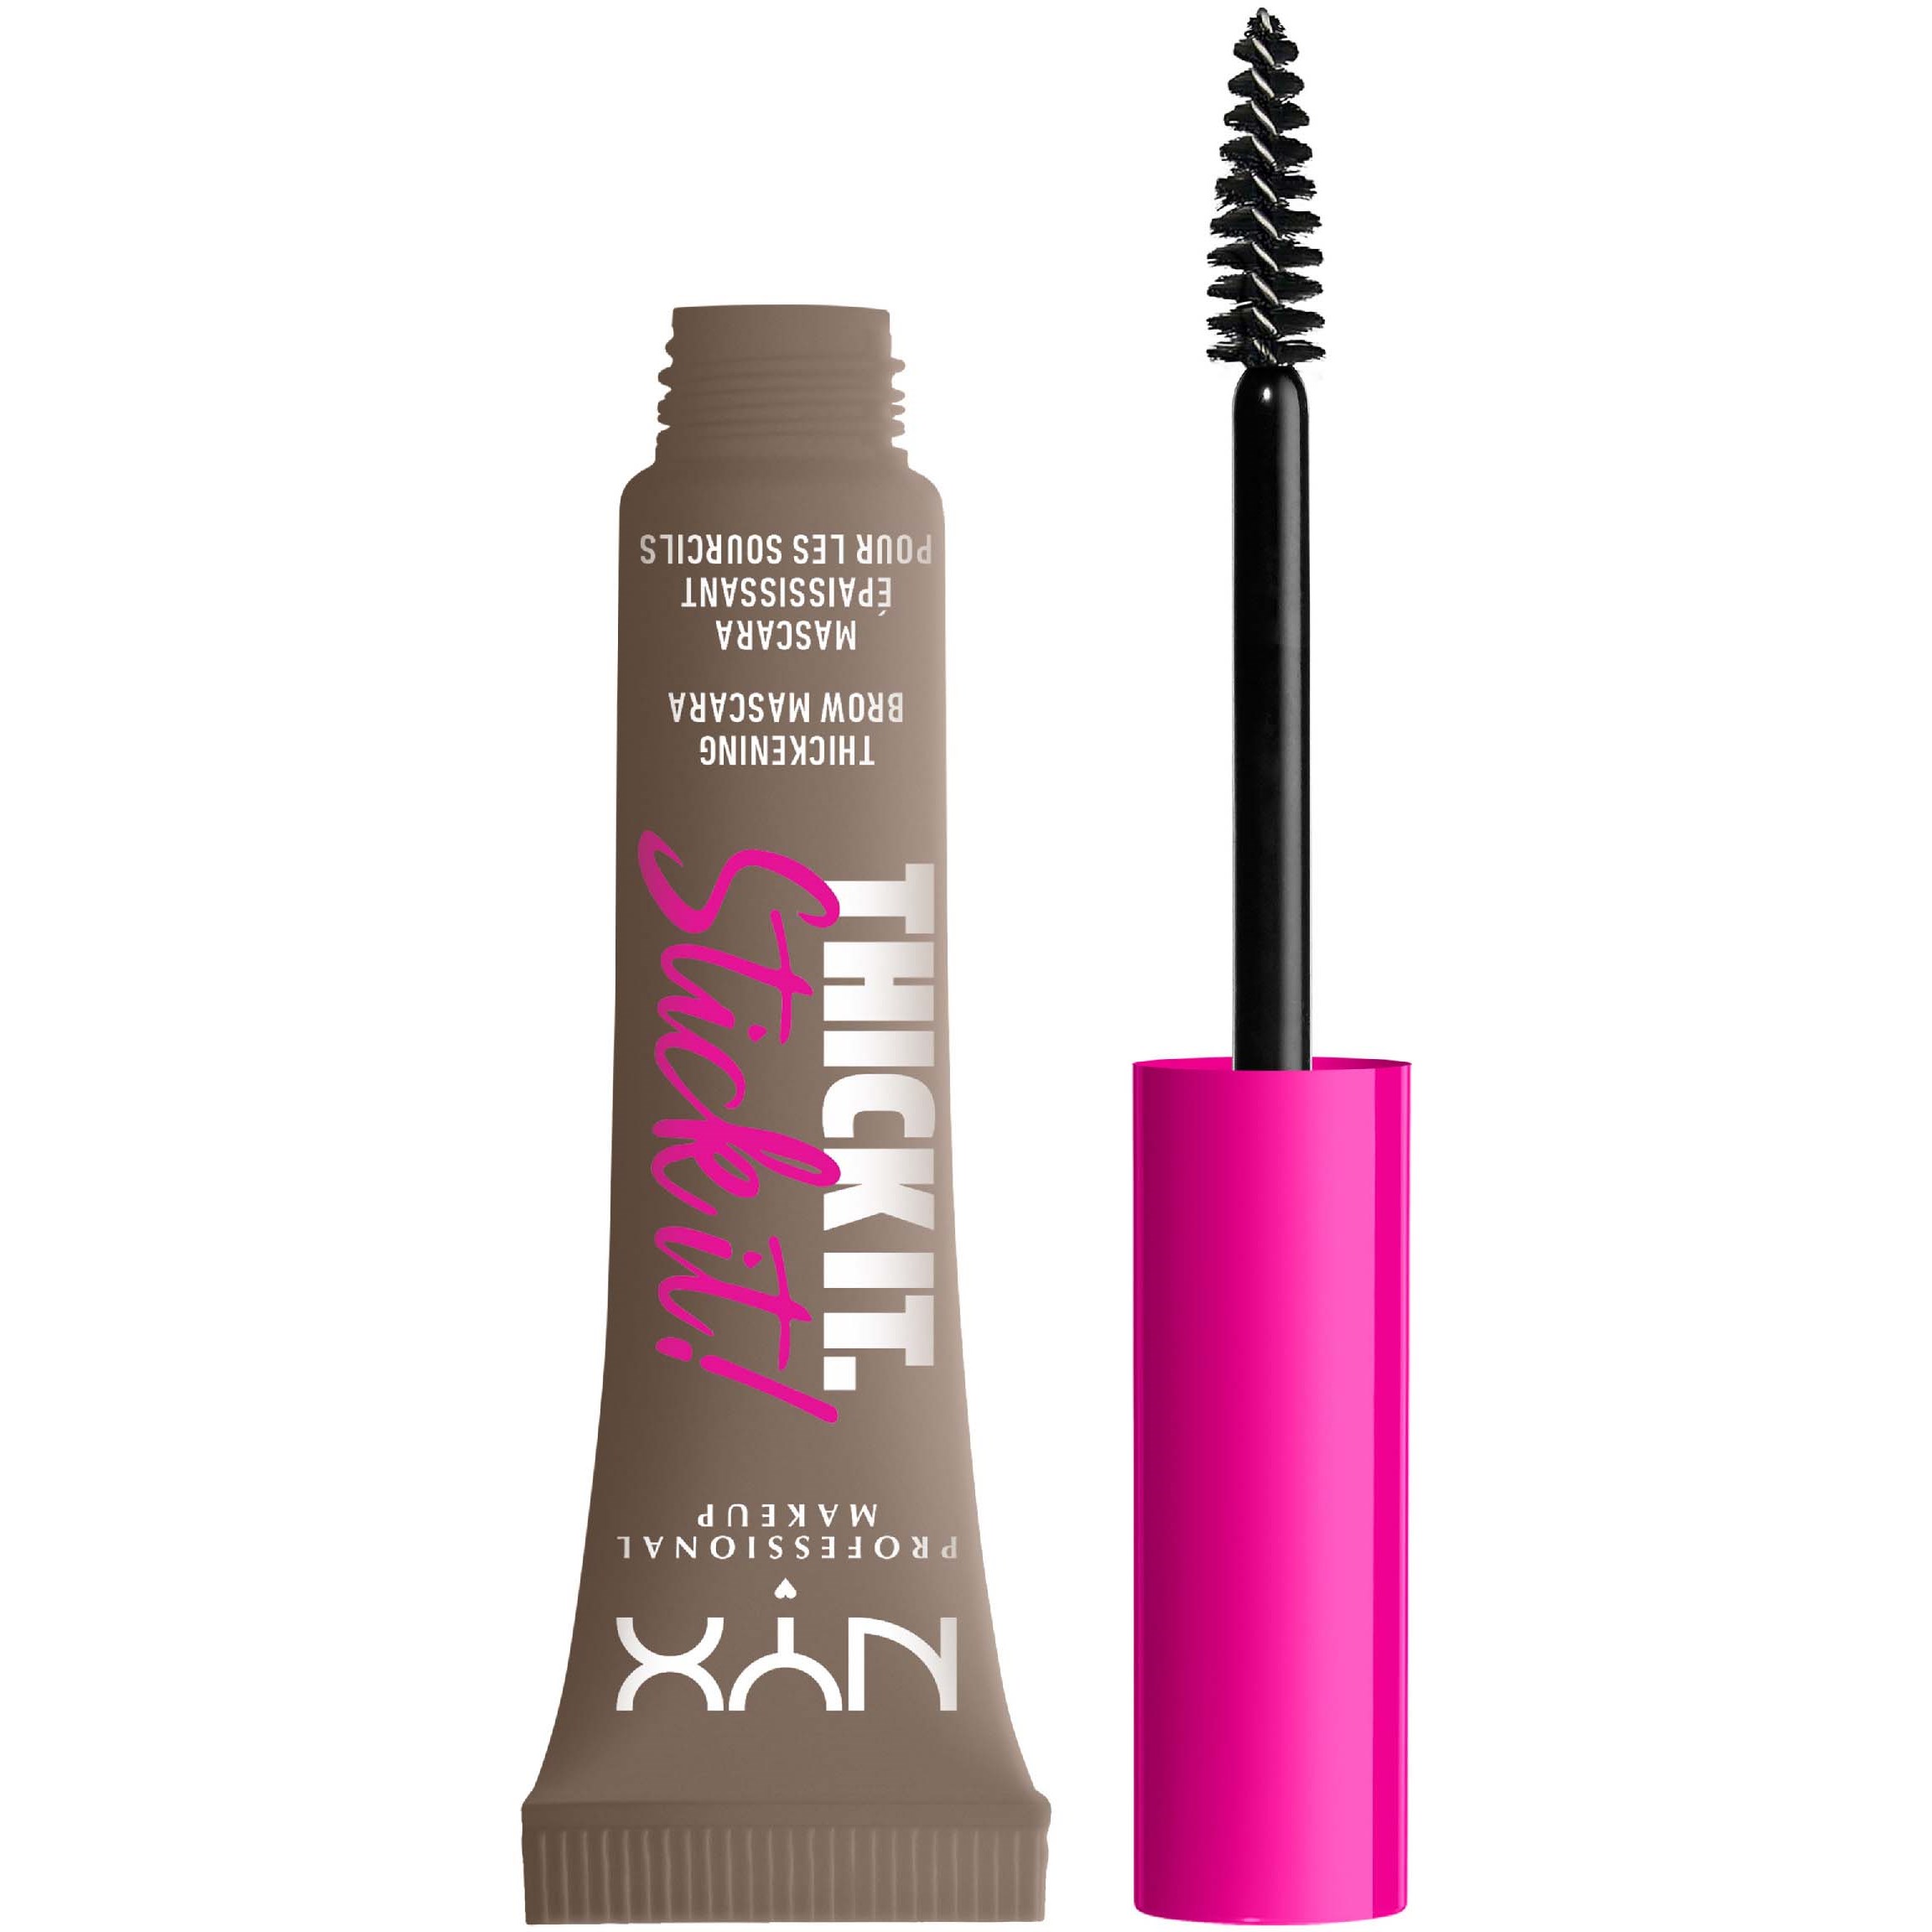 Läs mer om NYX PROFESSIONAL MAKEUP Thick it. Stick it! Brow Mascara Taupe